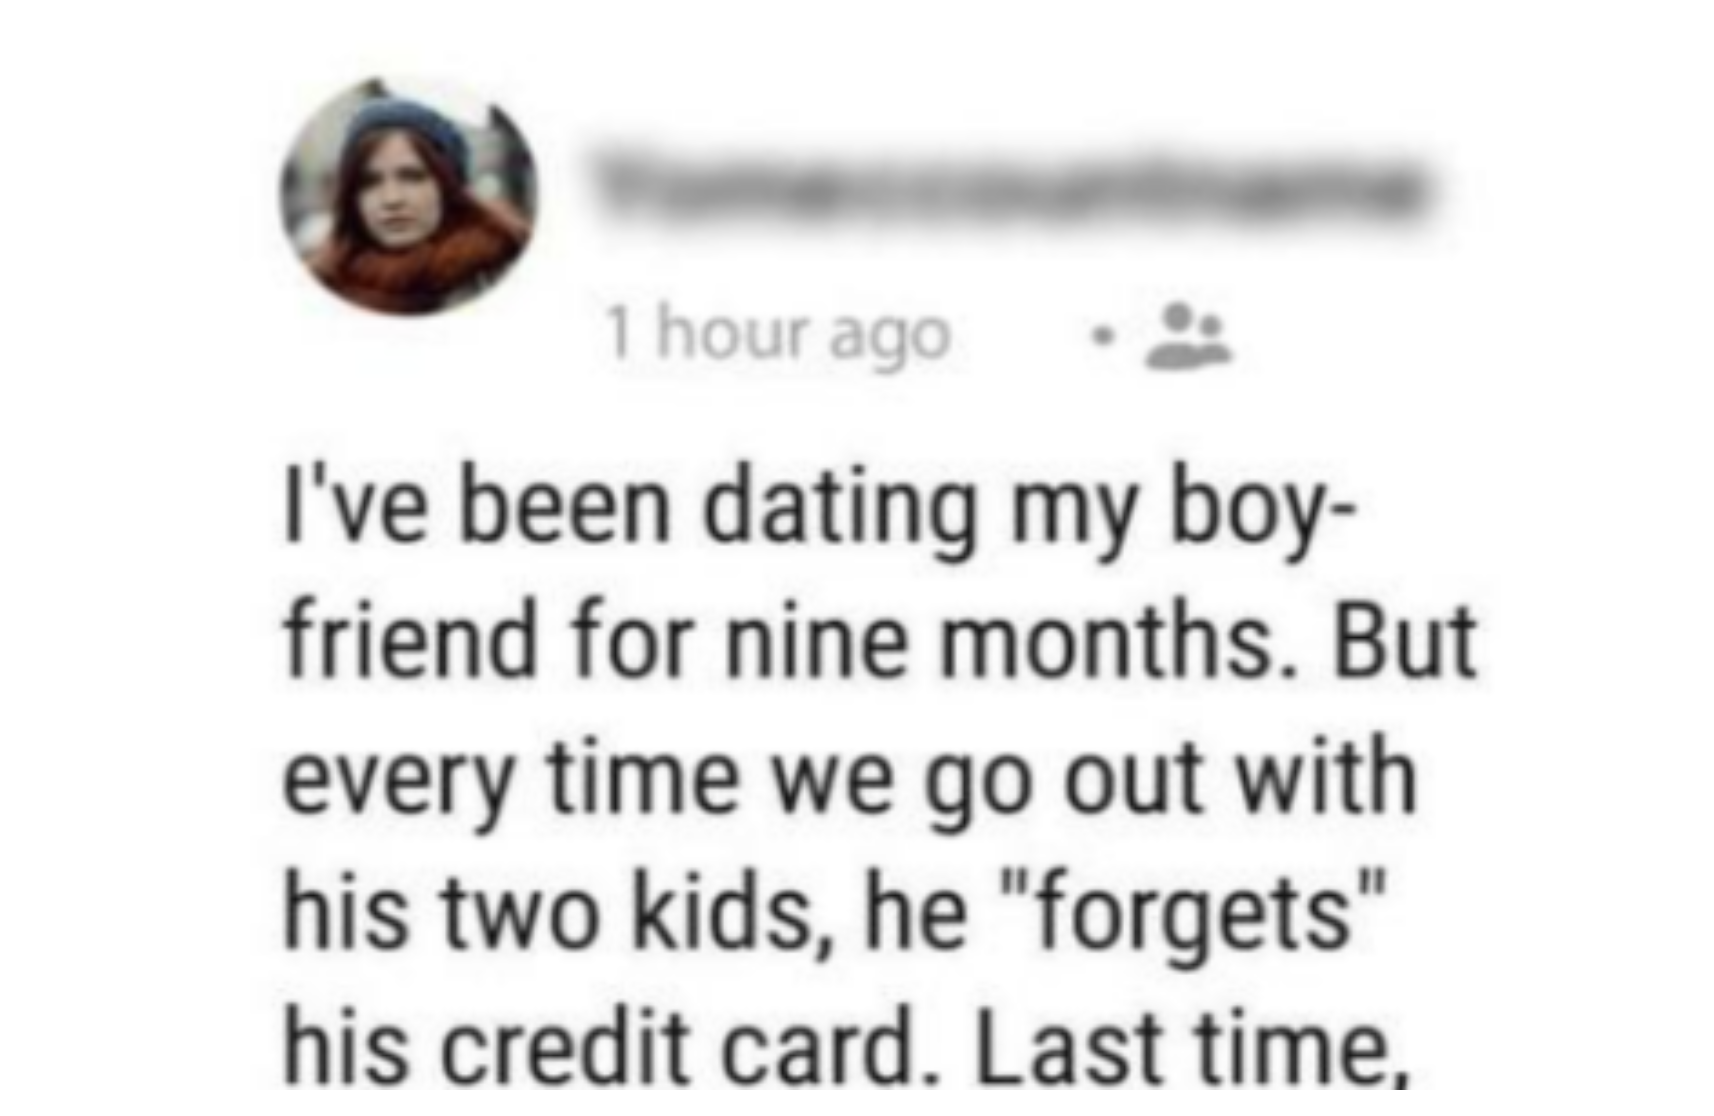 Is it fair for her to pay for her boyfriend’s children every time they go out?